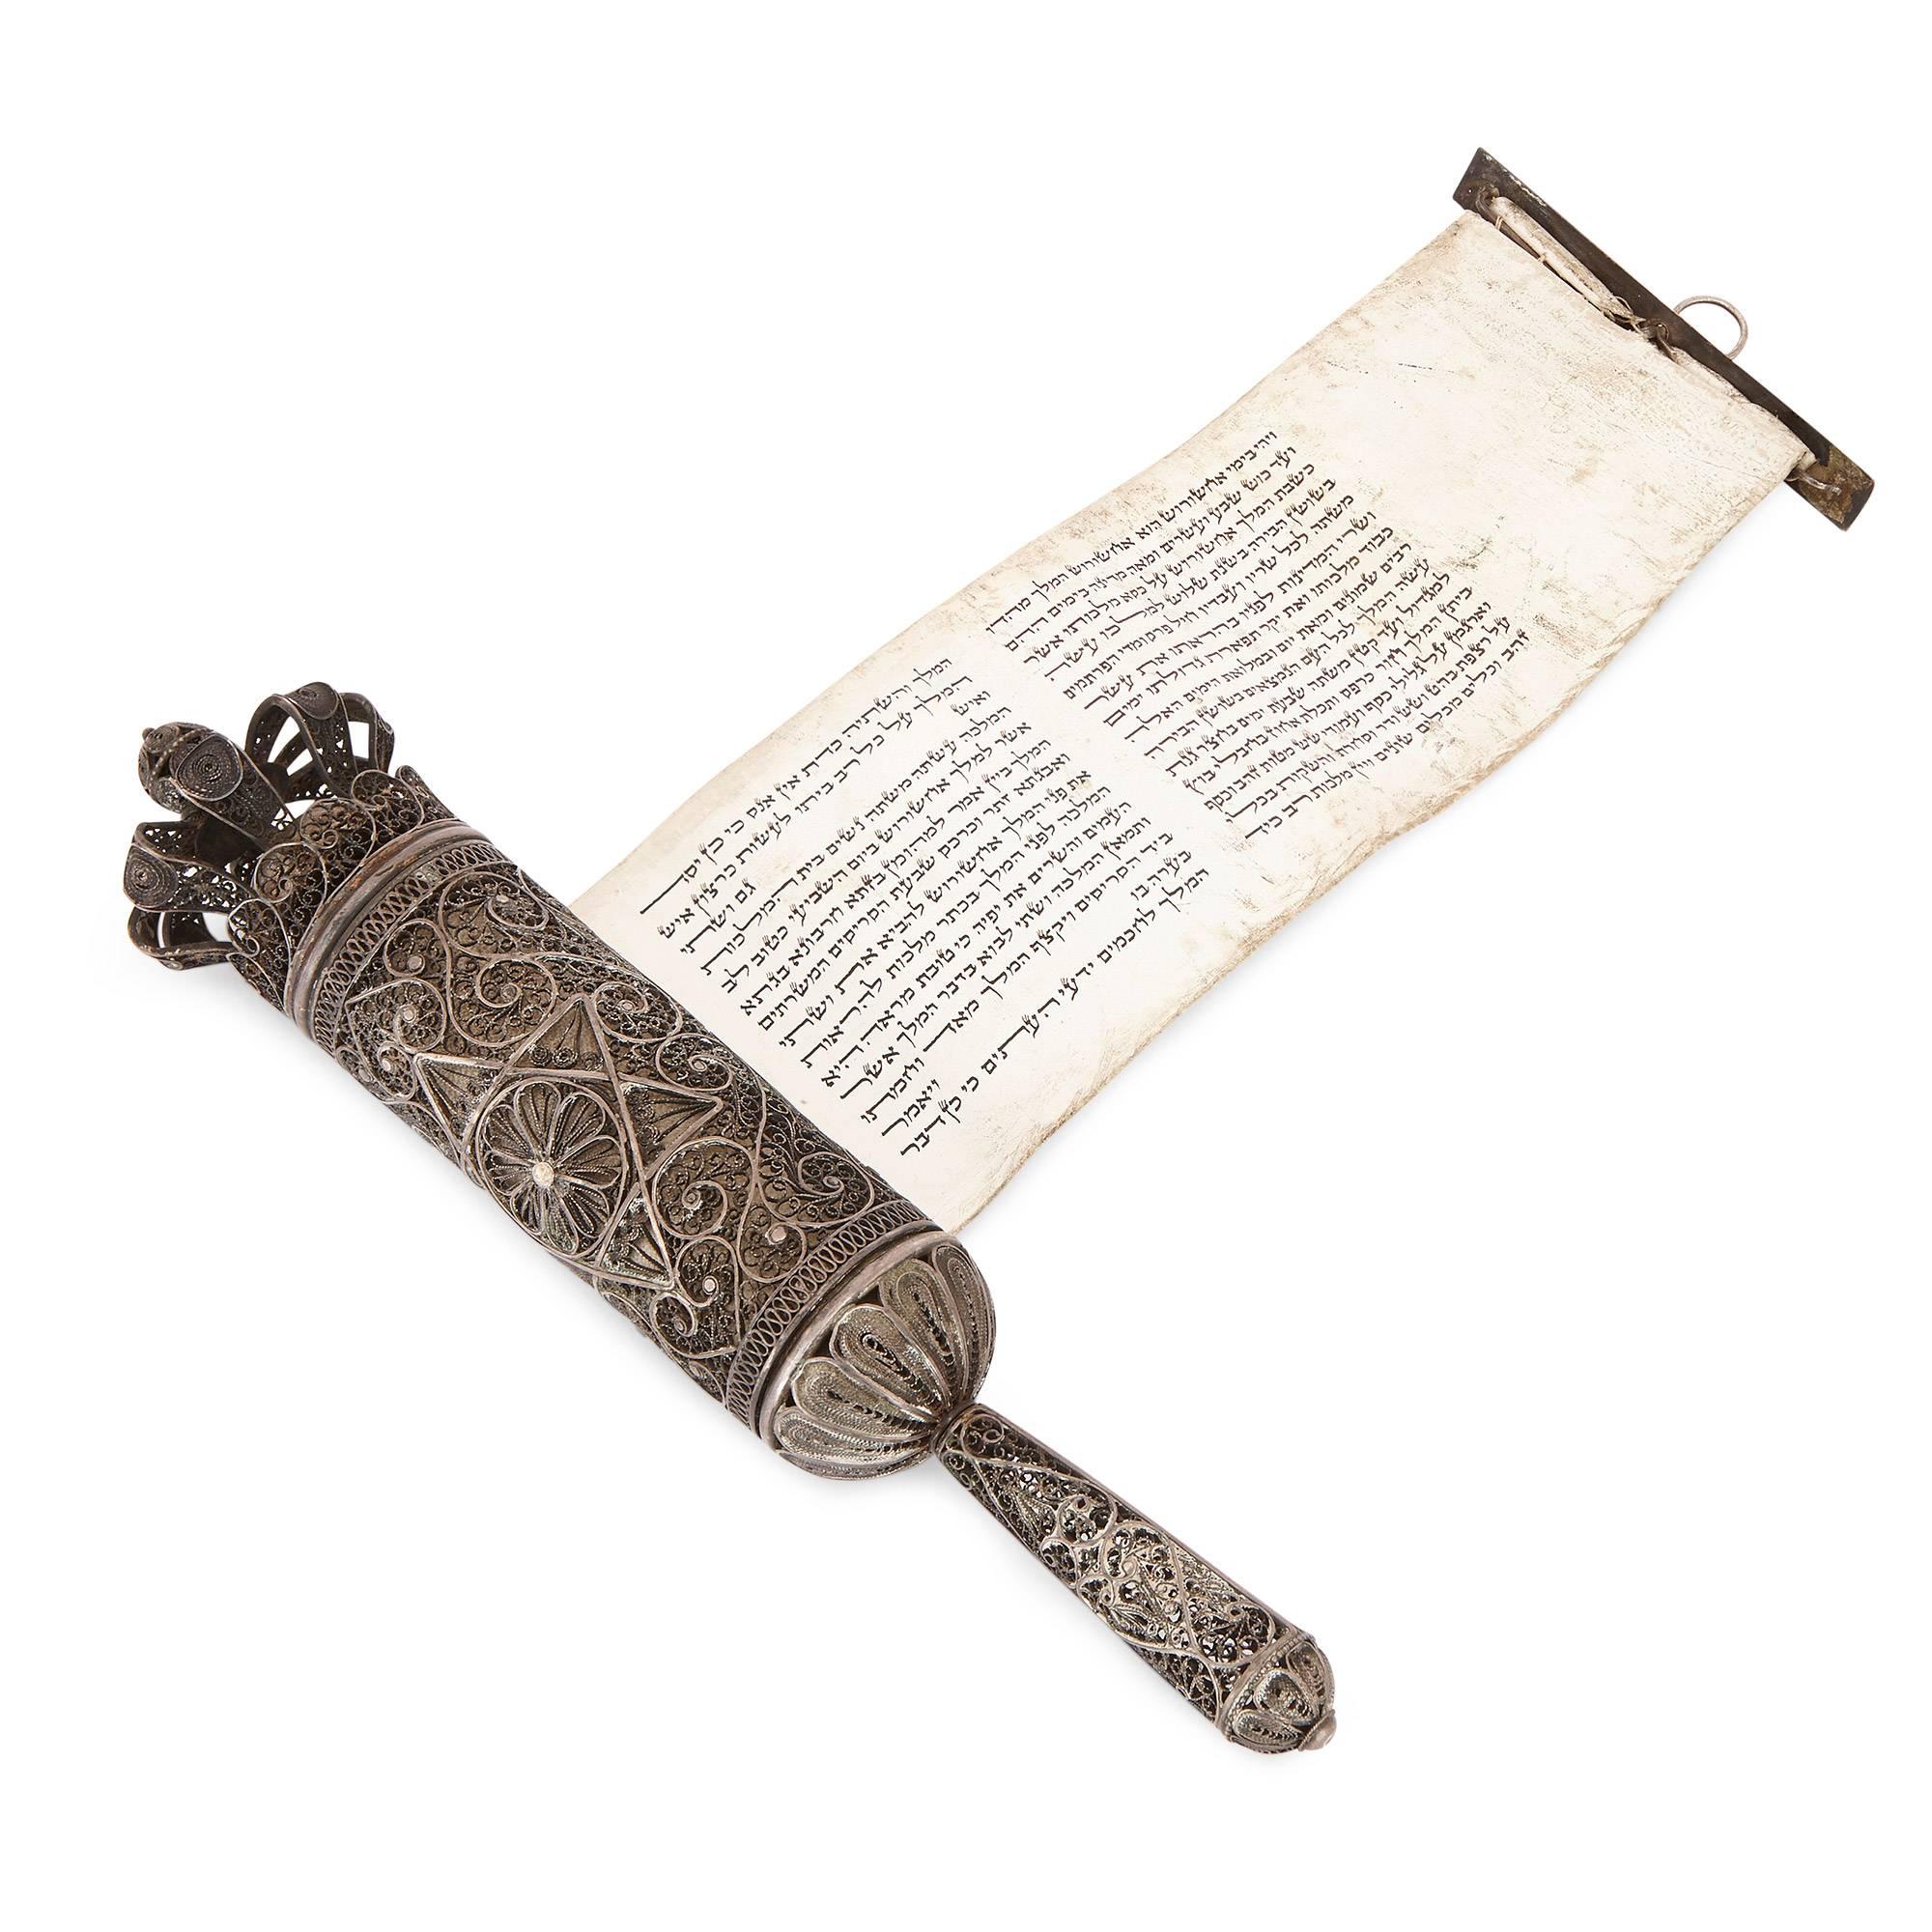 The fine and intricate Megillah case showcases some of the finest work of the Bezalel Academy of Arts and Design, the most celebrated artistic school in Jerusalem of the early 20th Century. Founded in 1906, the aim of its founder, painter Boris